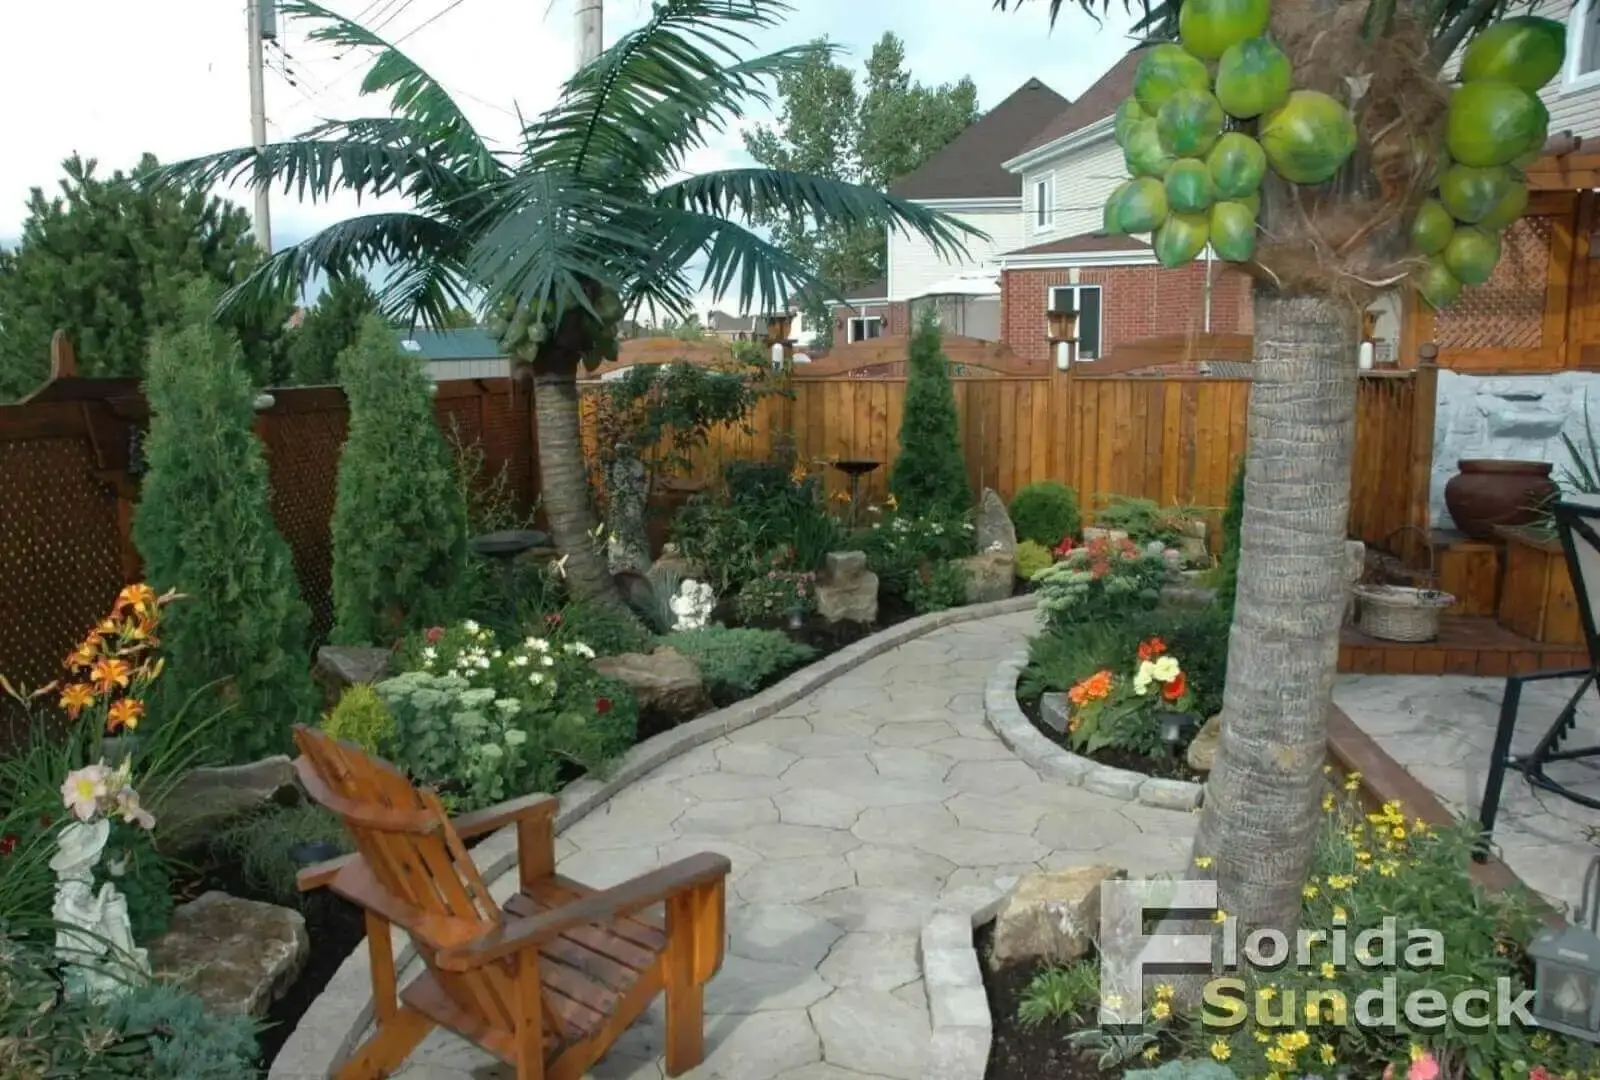 Landscaping in Vaudreuil